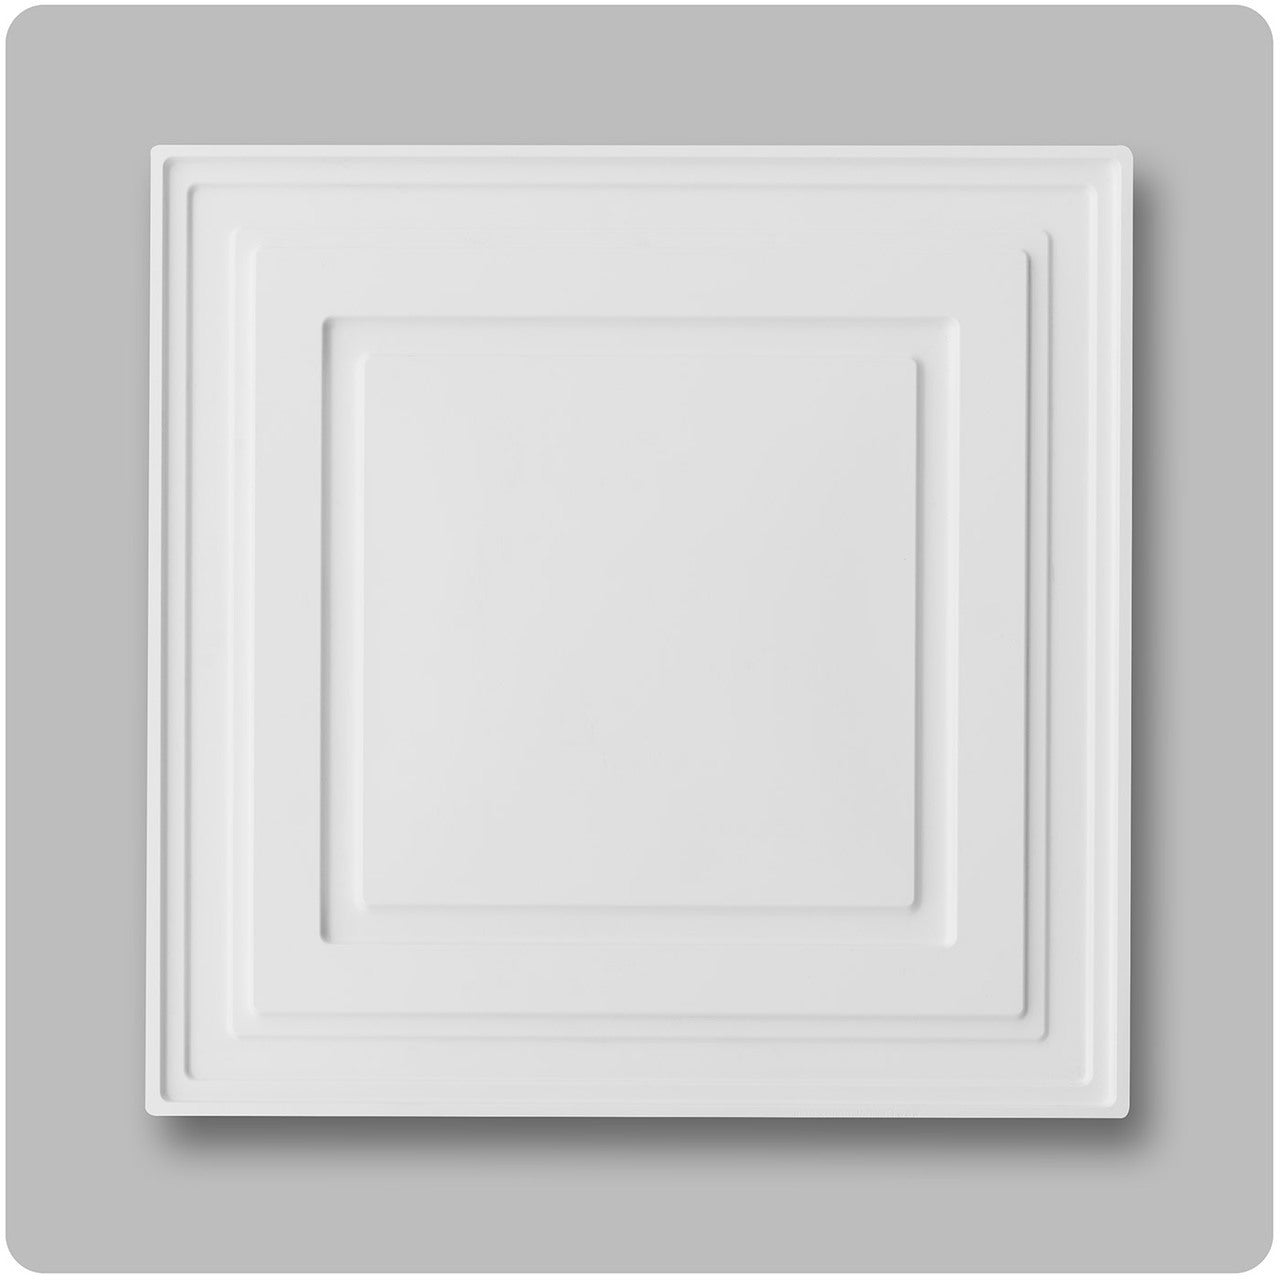 Sample White Mission Ceiling Tile 2' x 2' - Free Shipping